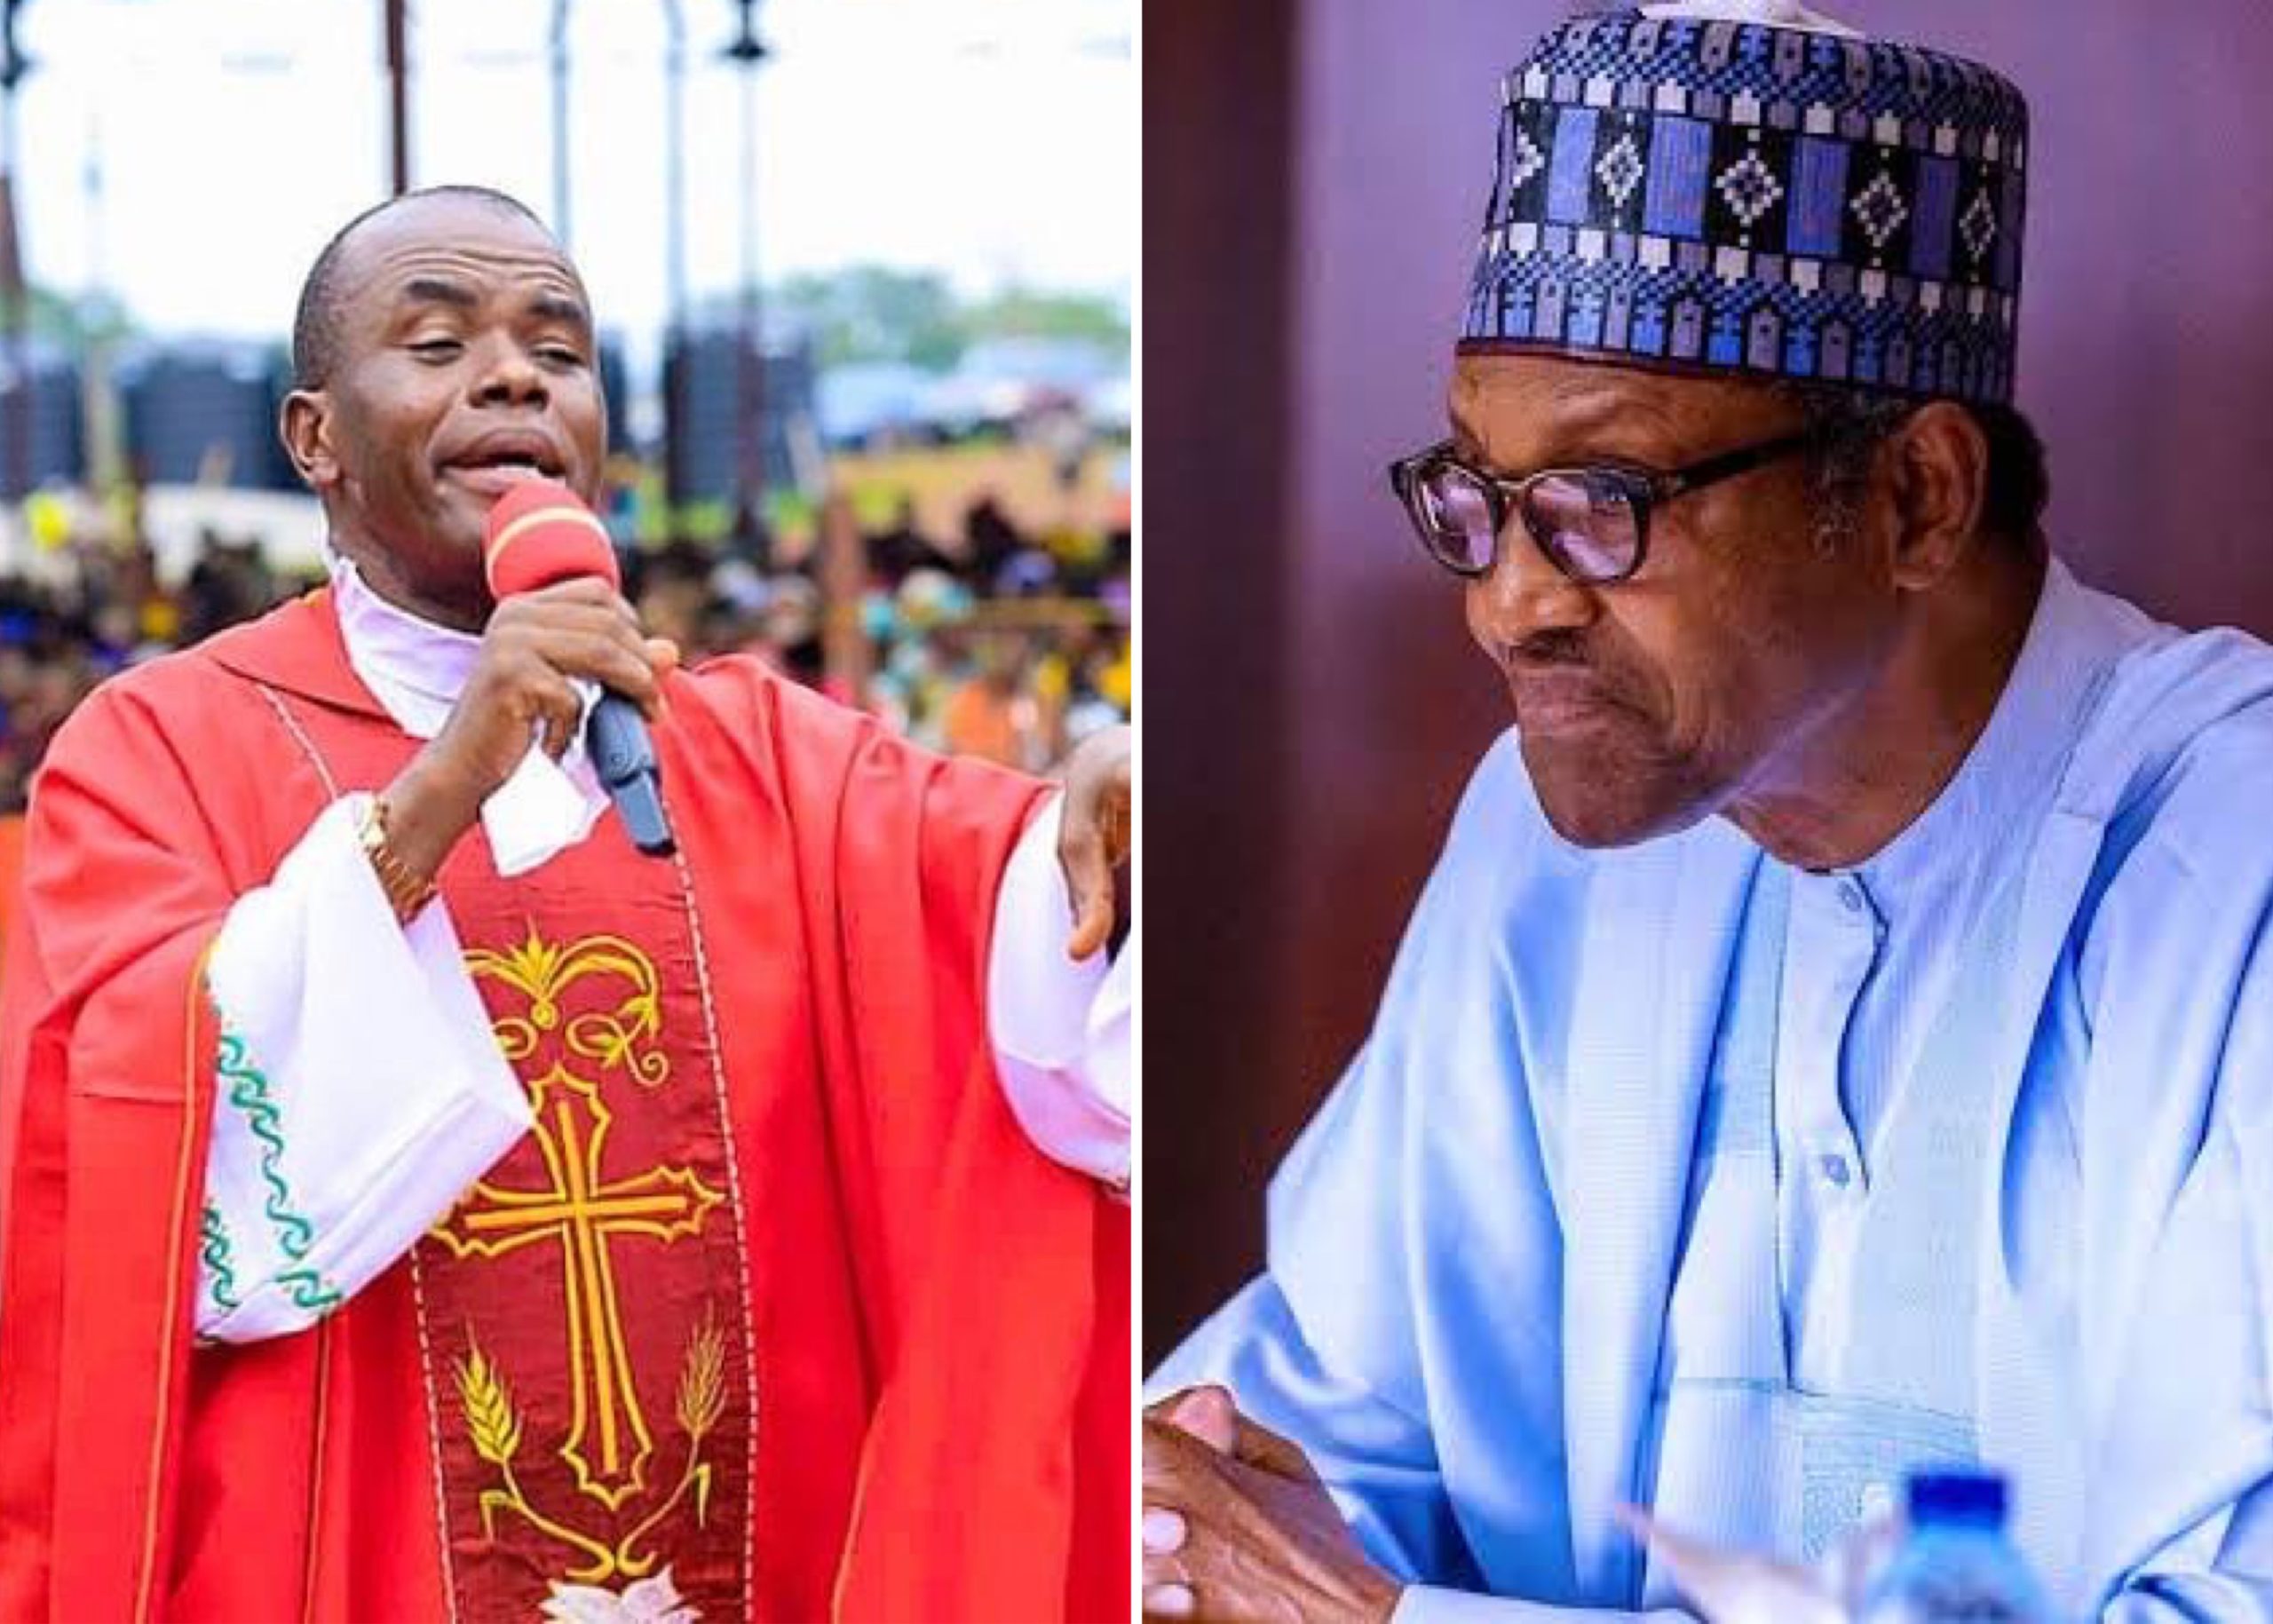 APC Threatens To Report Mbaka To Pope, Expose His Sources Of Inspiration